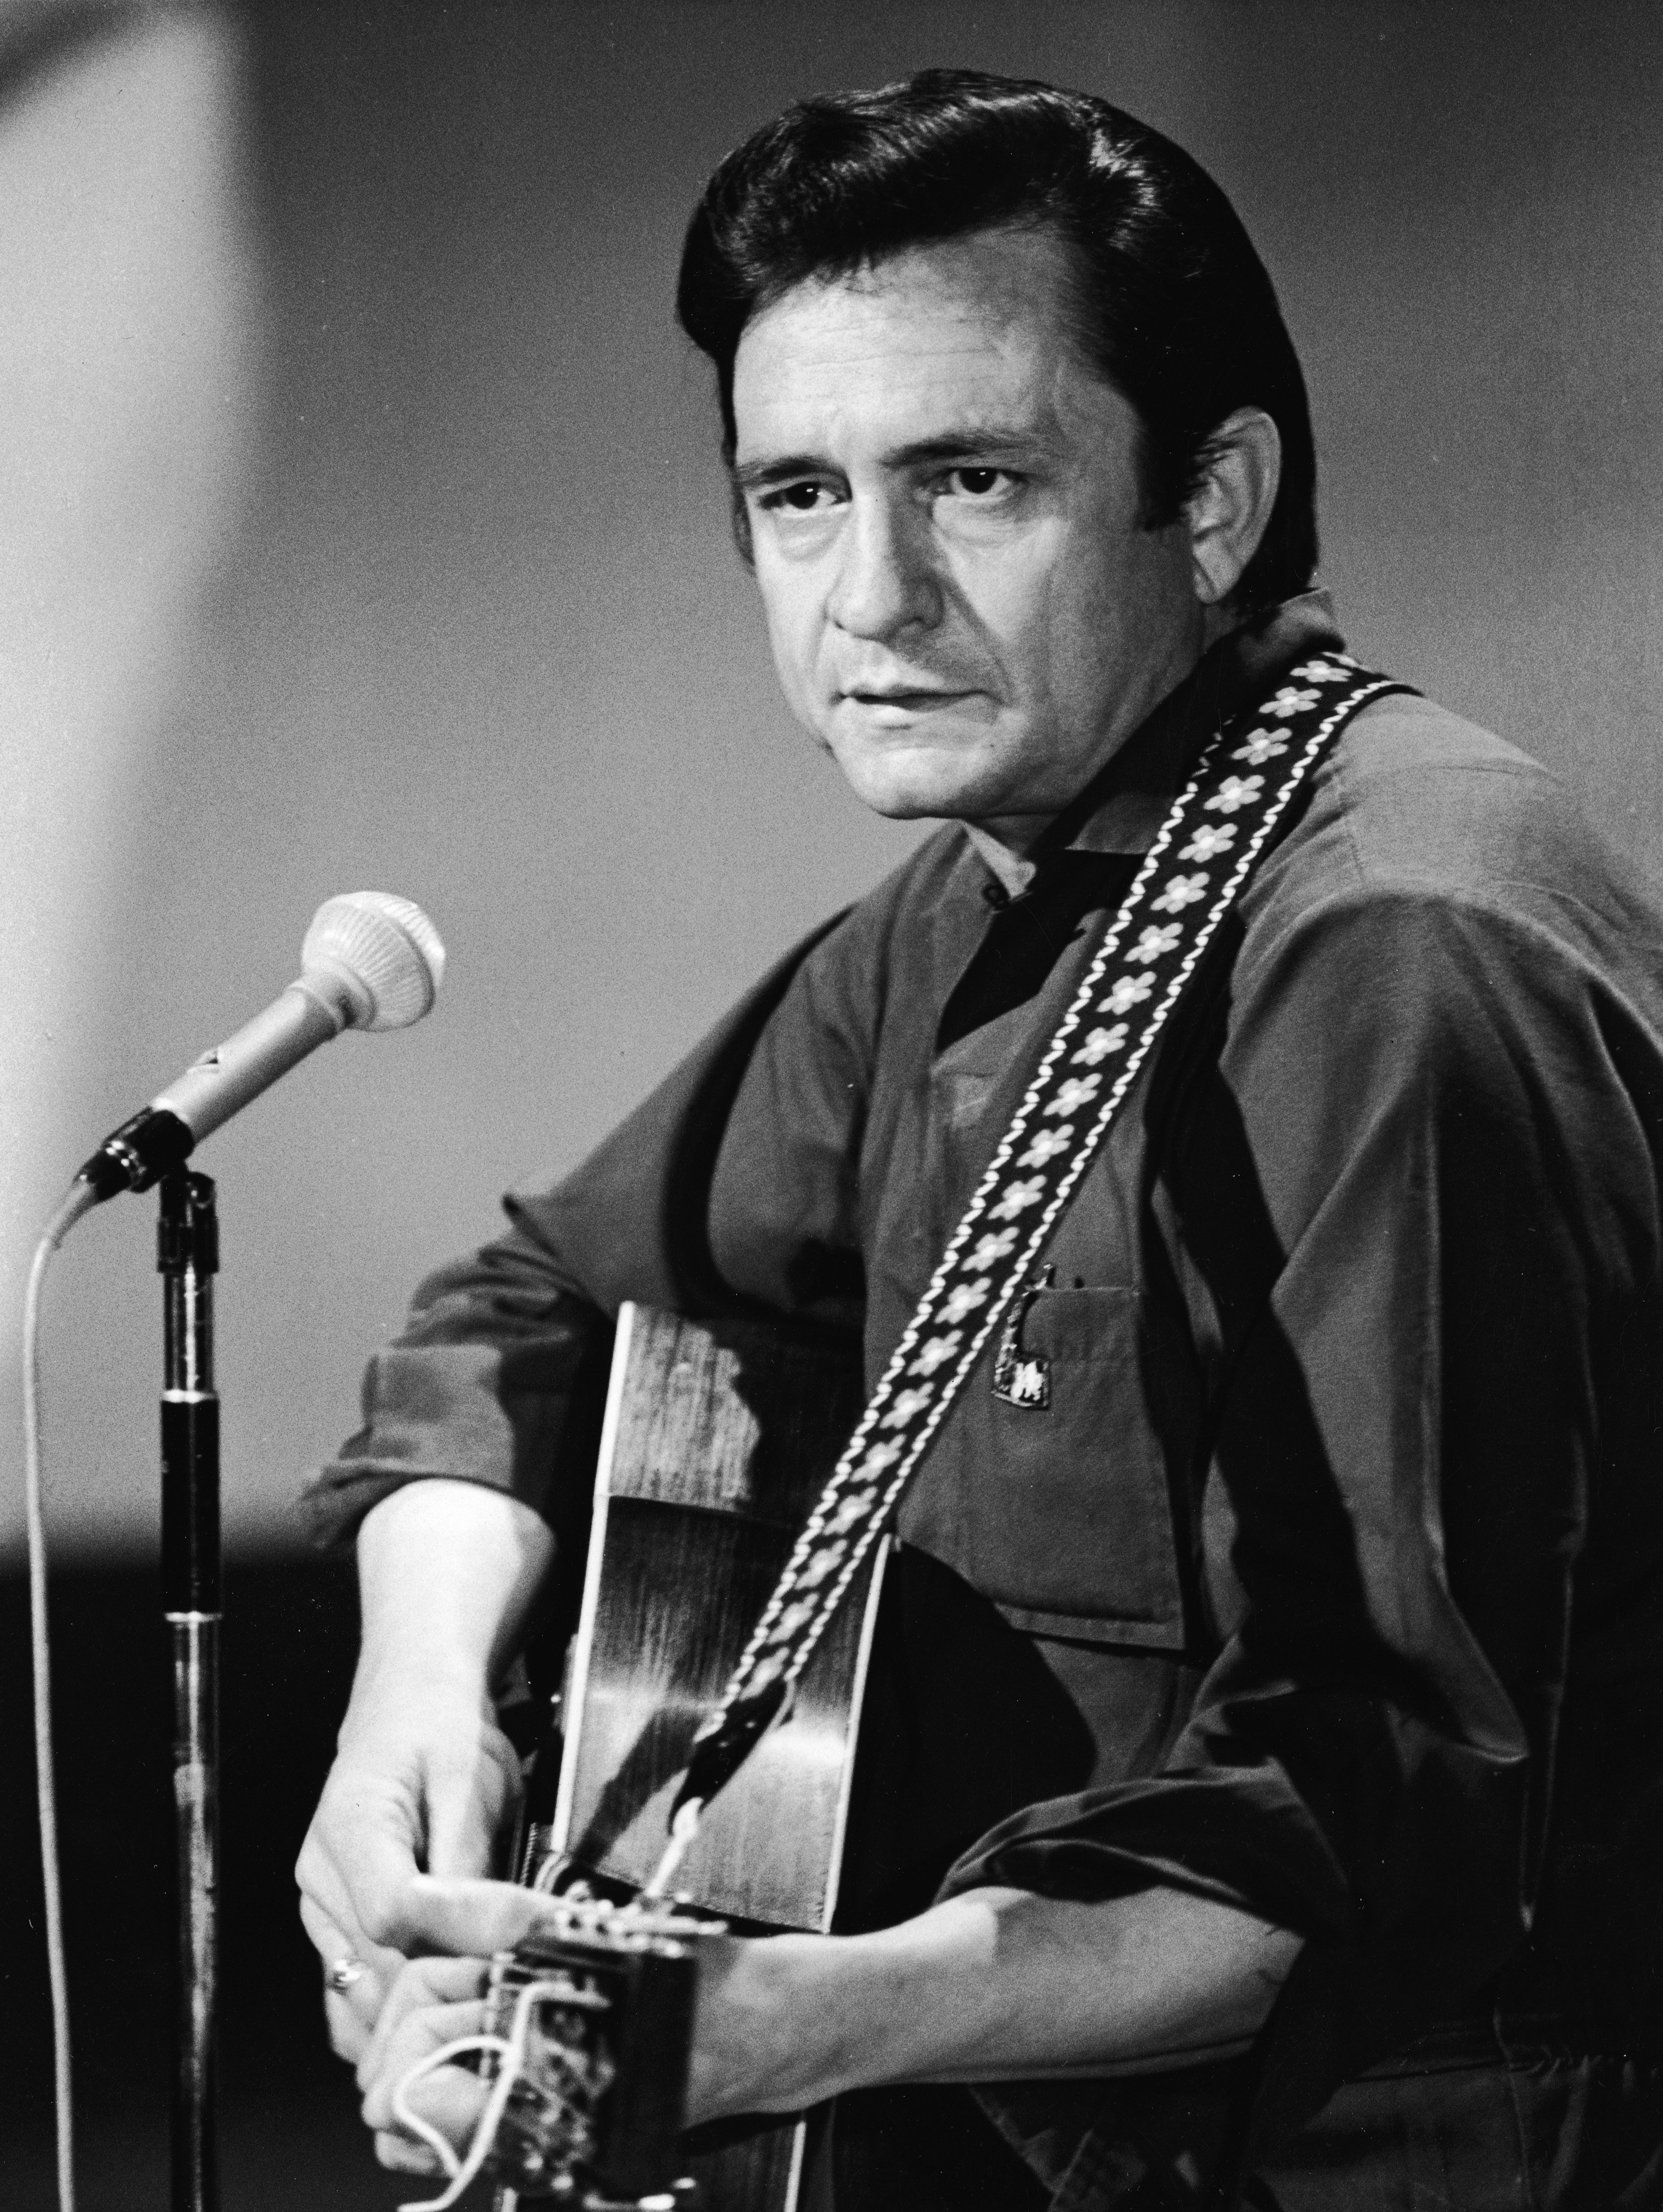 Johnny Cash playing the guitar in a still from his television variety series, 'The Johnny Cash Show,' circa 1968 | Source: Getty Images